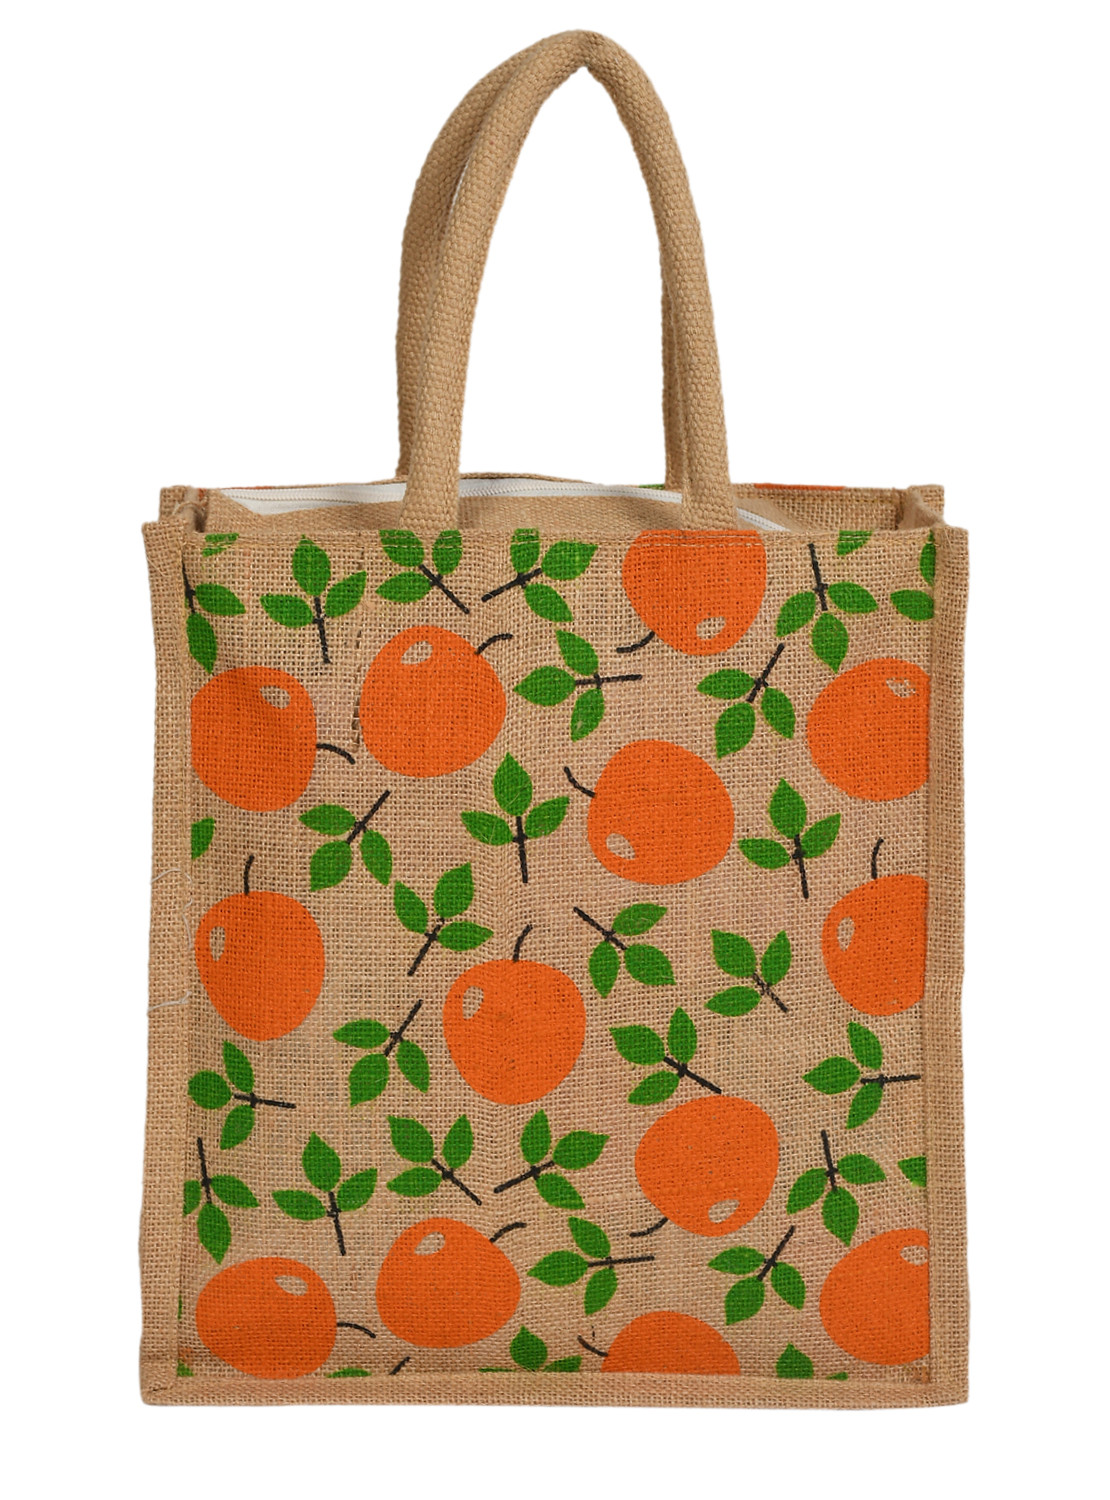 Kuber Industries Fruits Print Jute Reusable Eco-Friendly Hand Bag/Grocery Bag For Man, Woman With Handle (Orange) 54KM4362